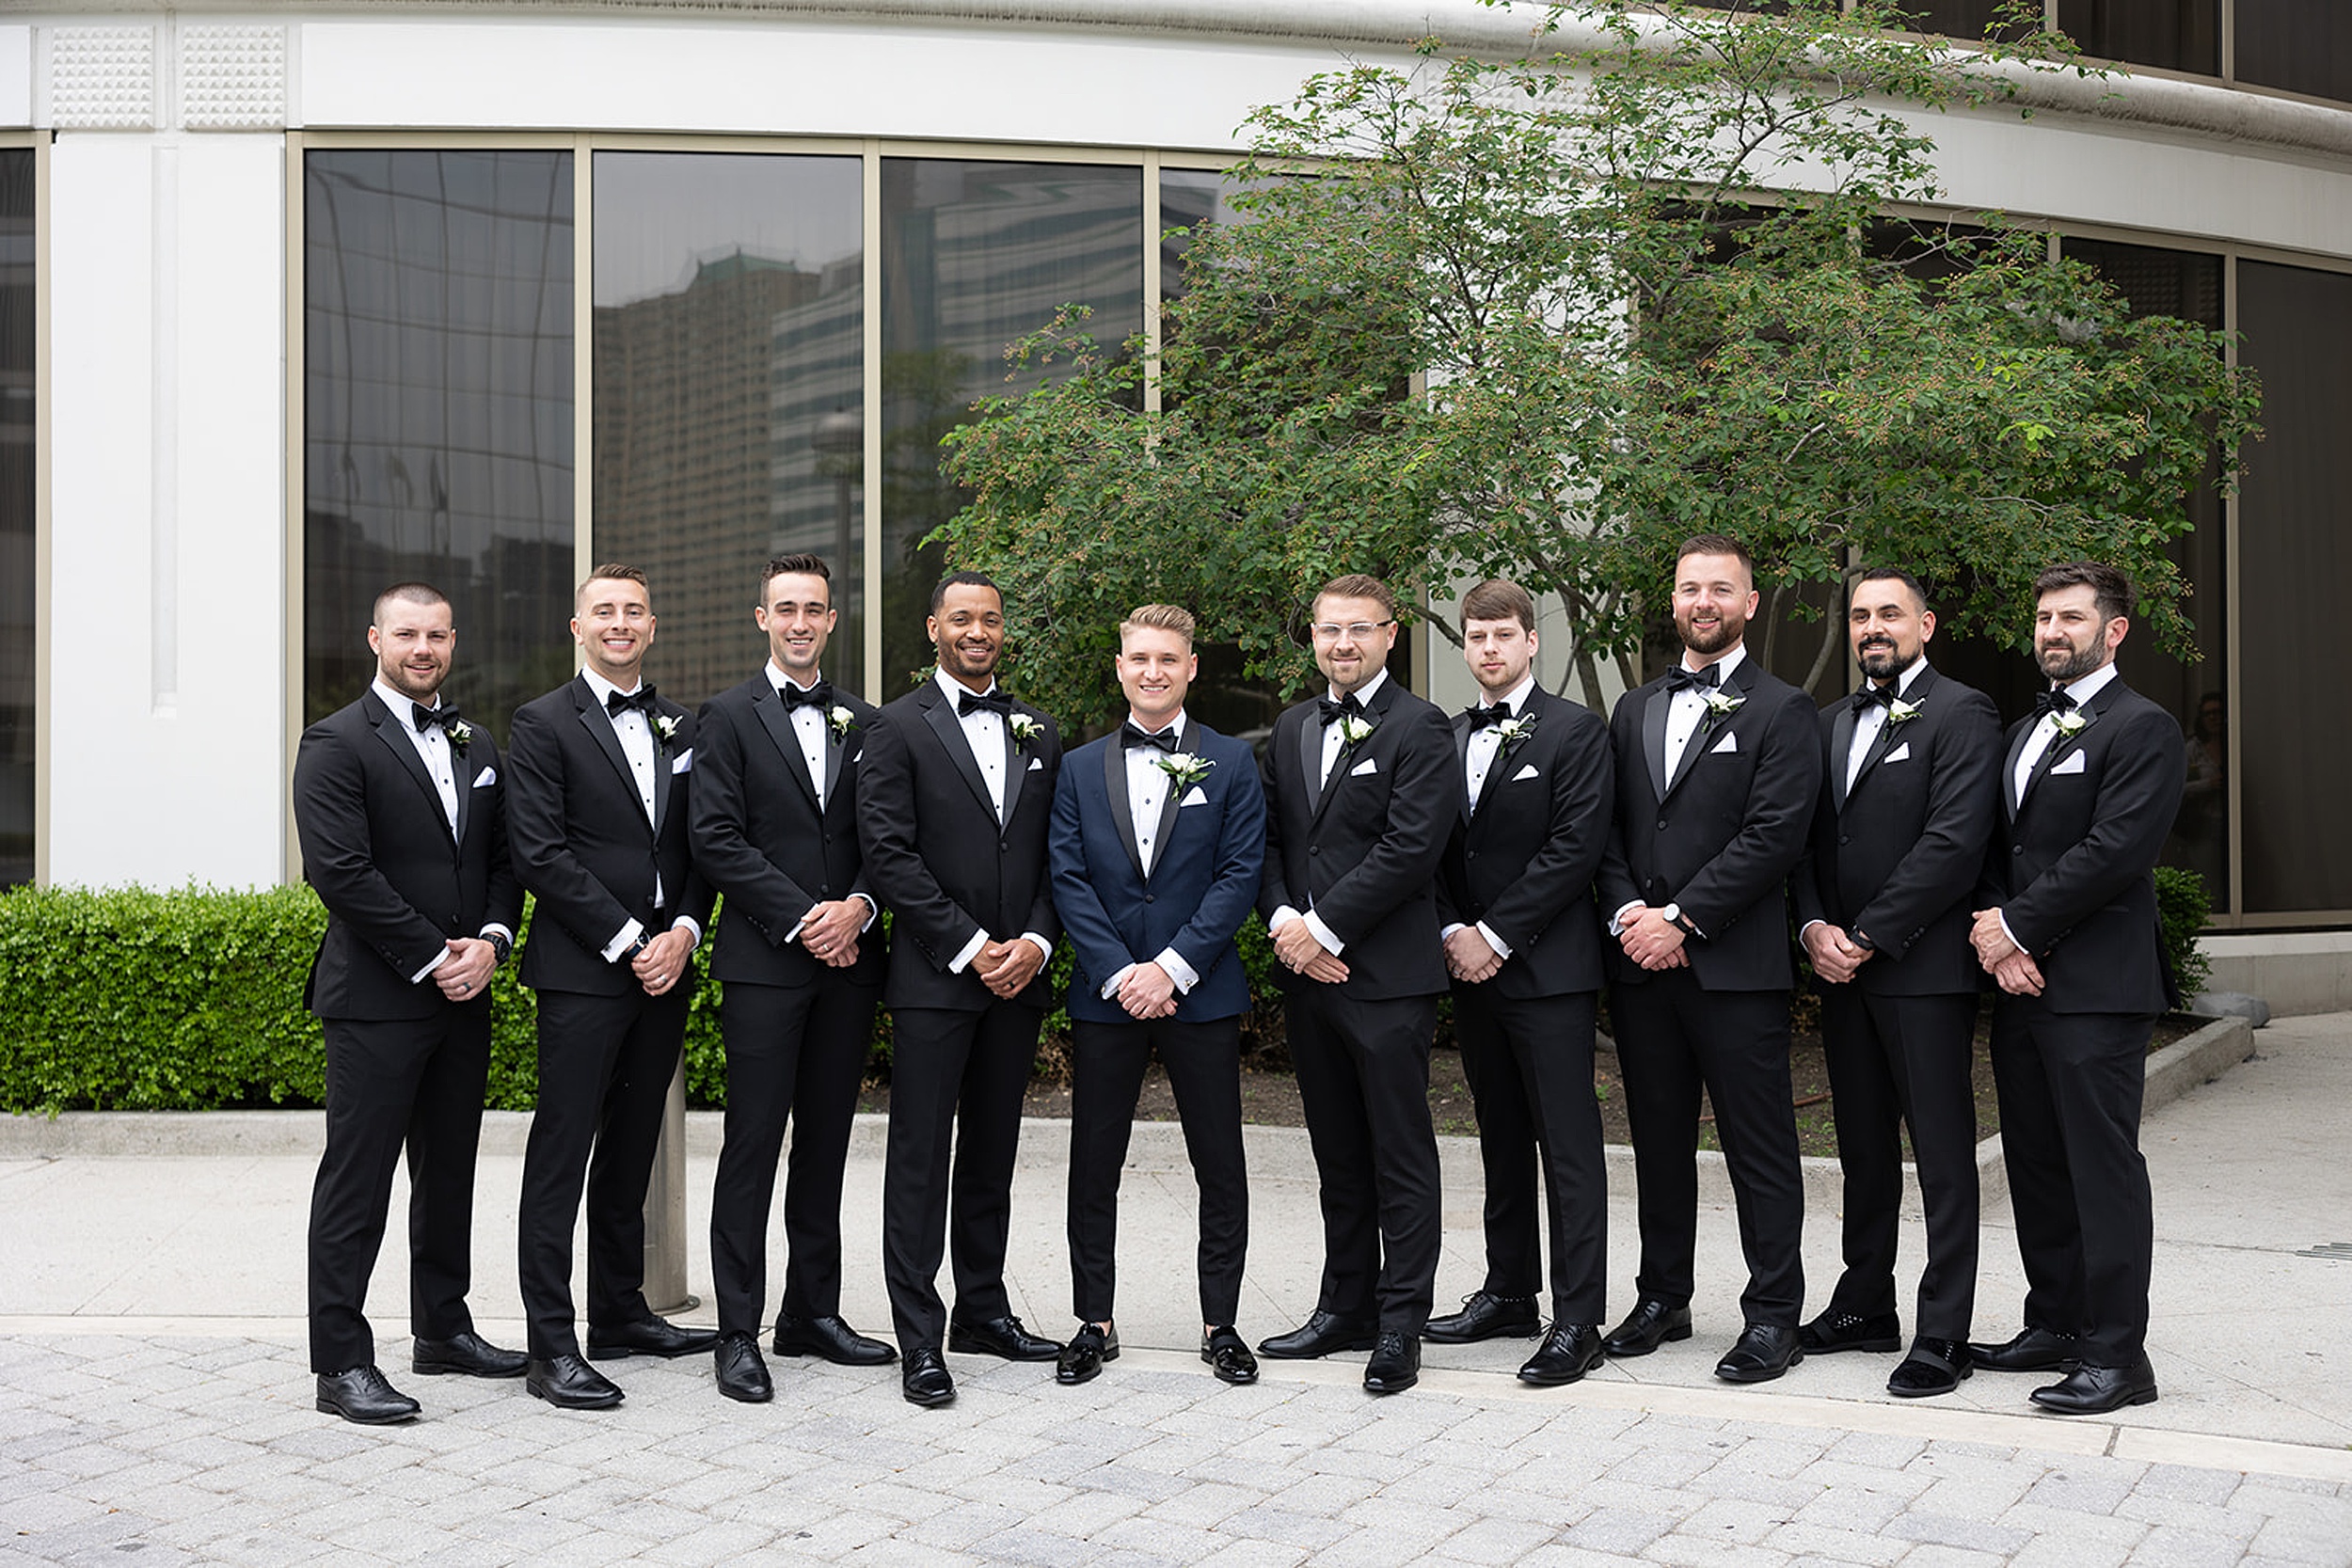 A groom in a blue tuxedo stands with his groomsmen all wearing black